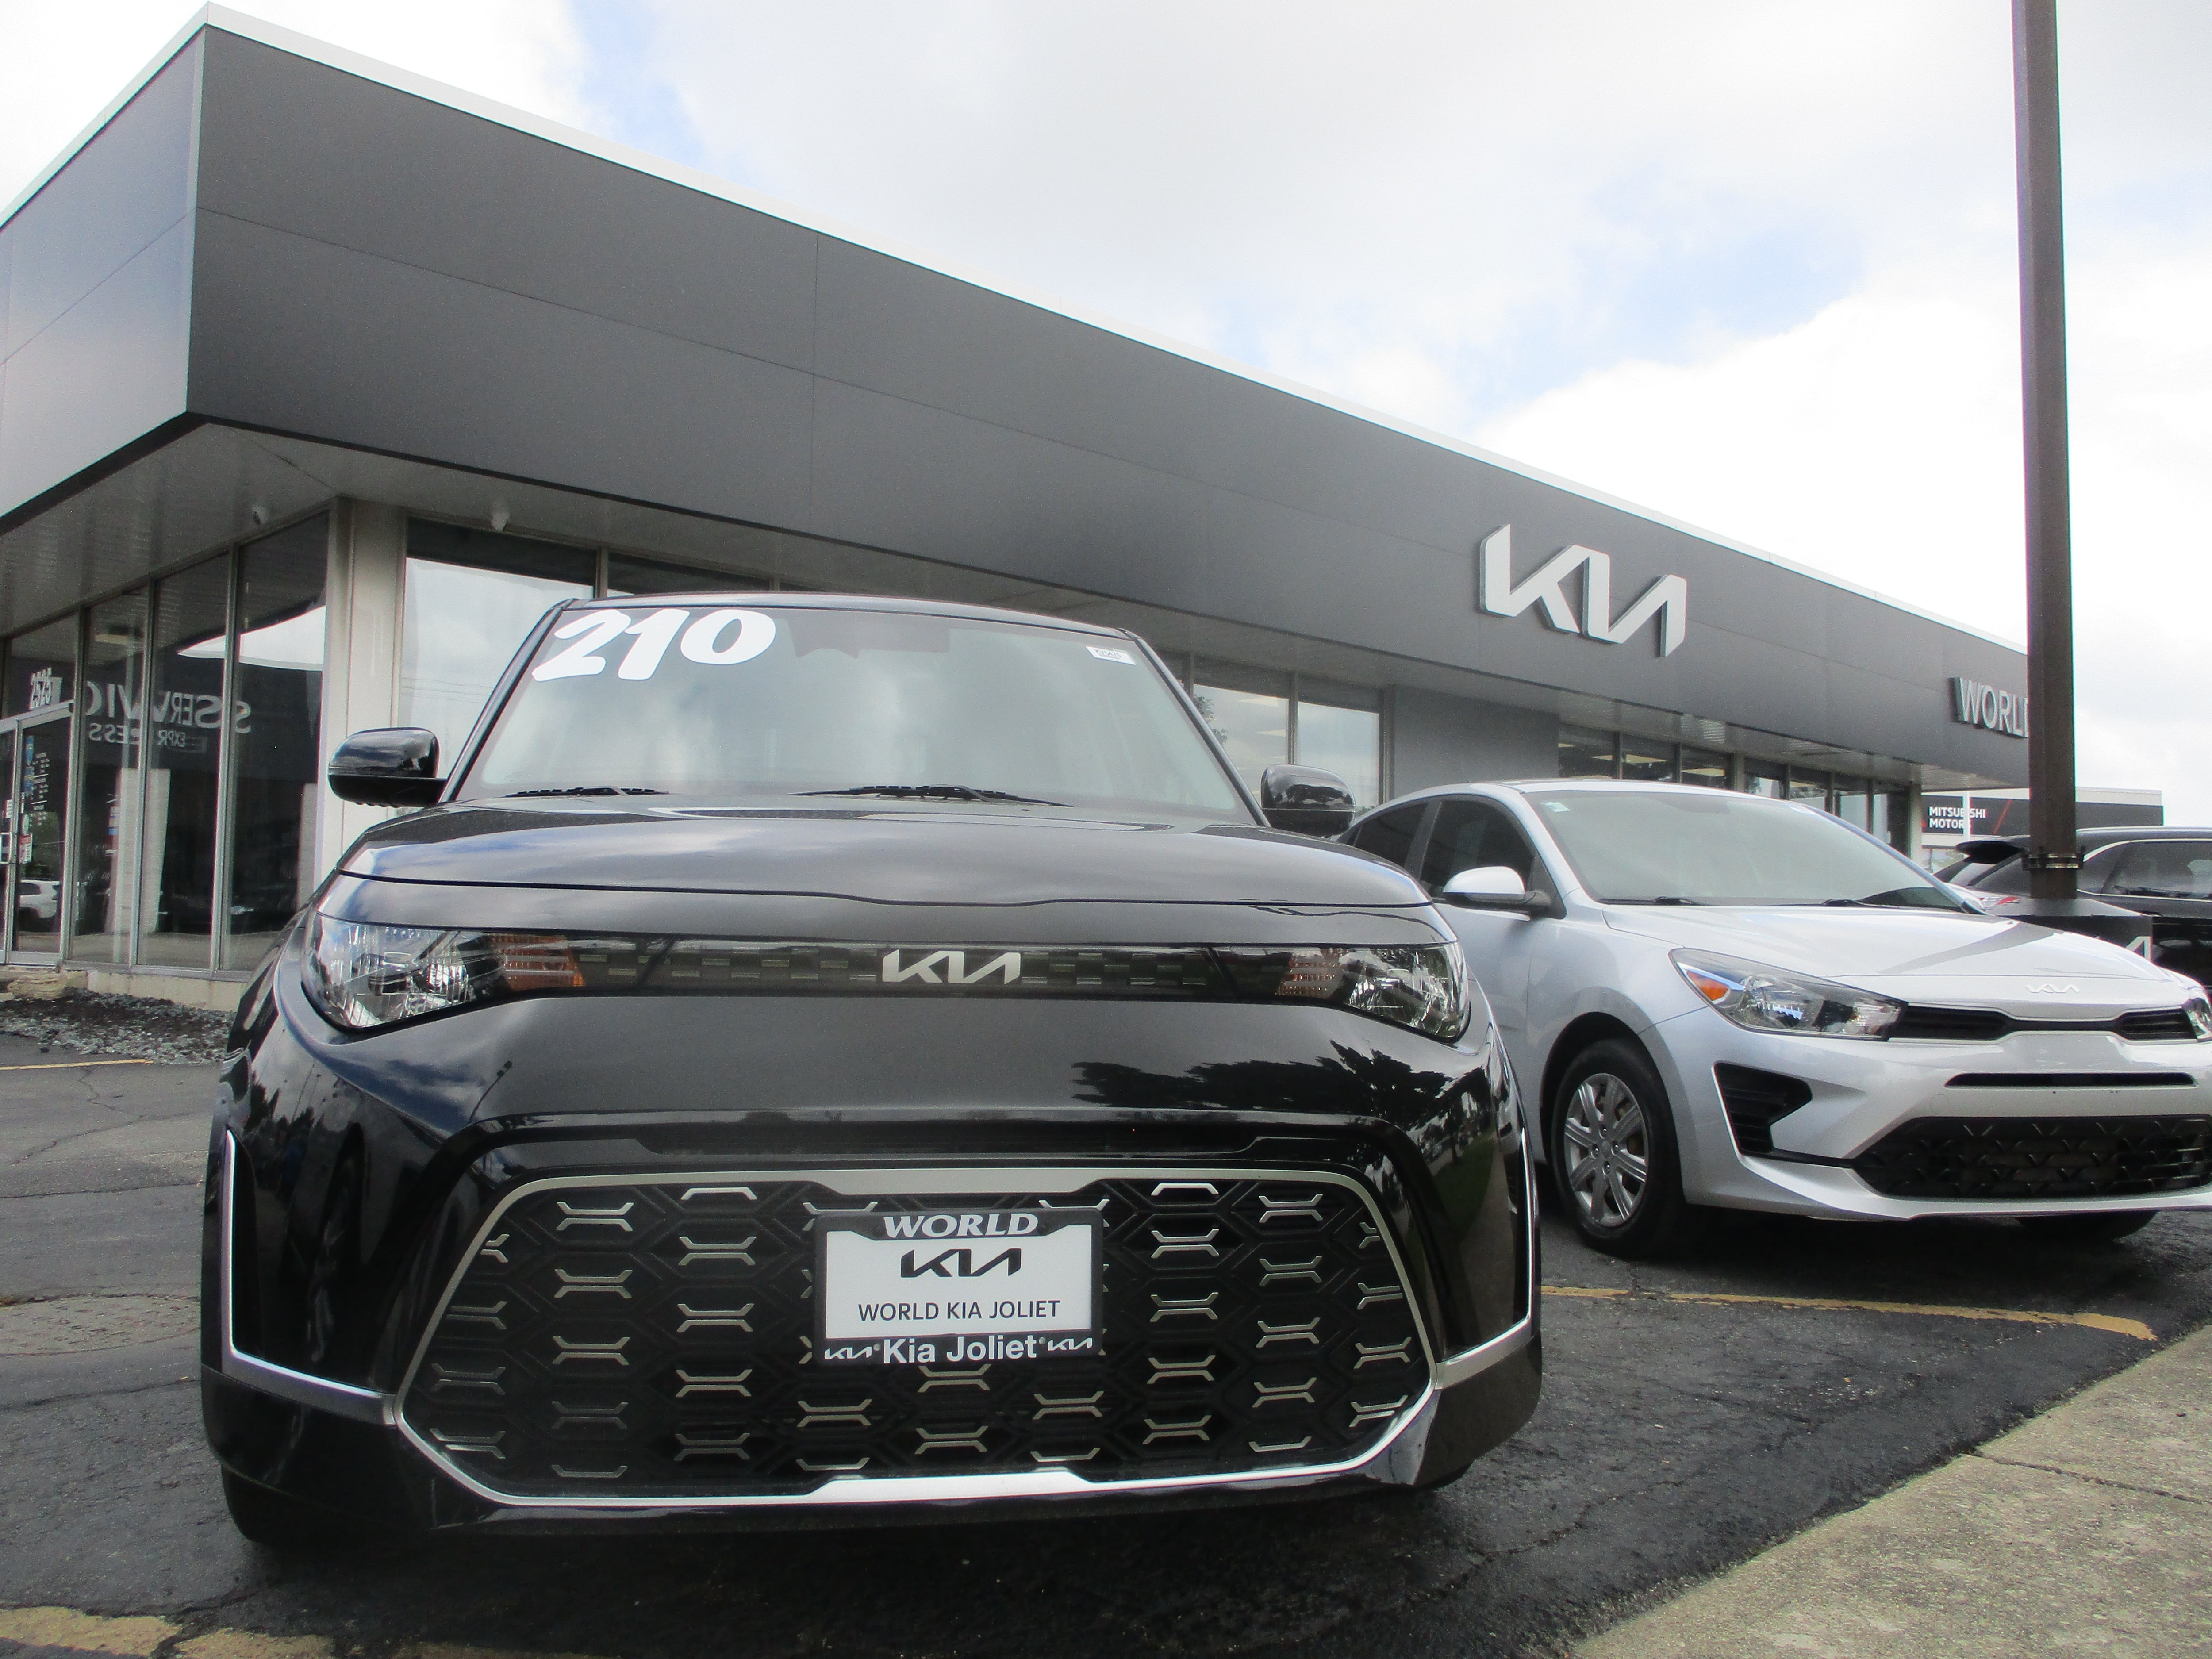 World Kia plans to expand in Joliet